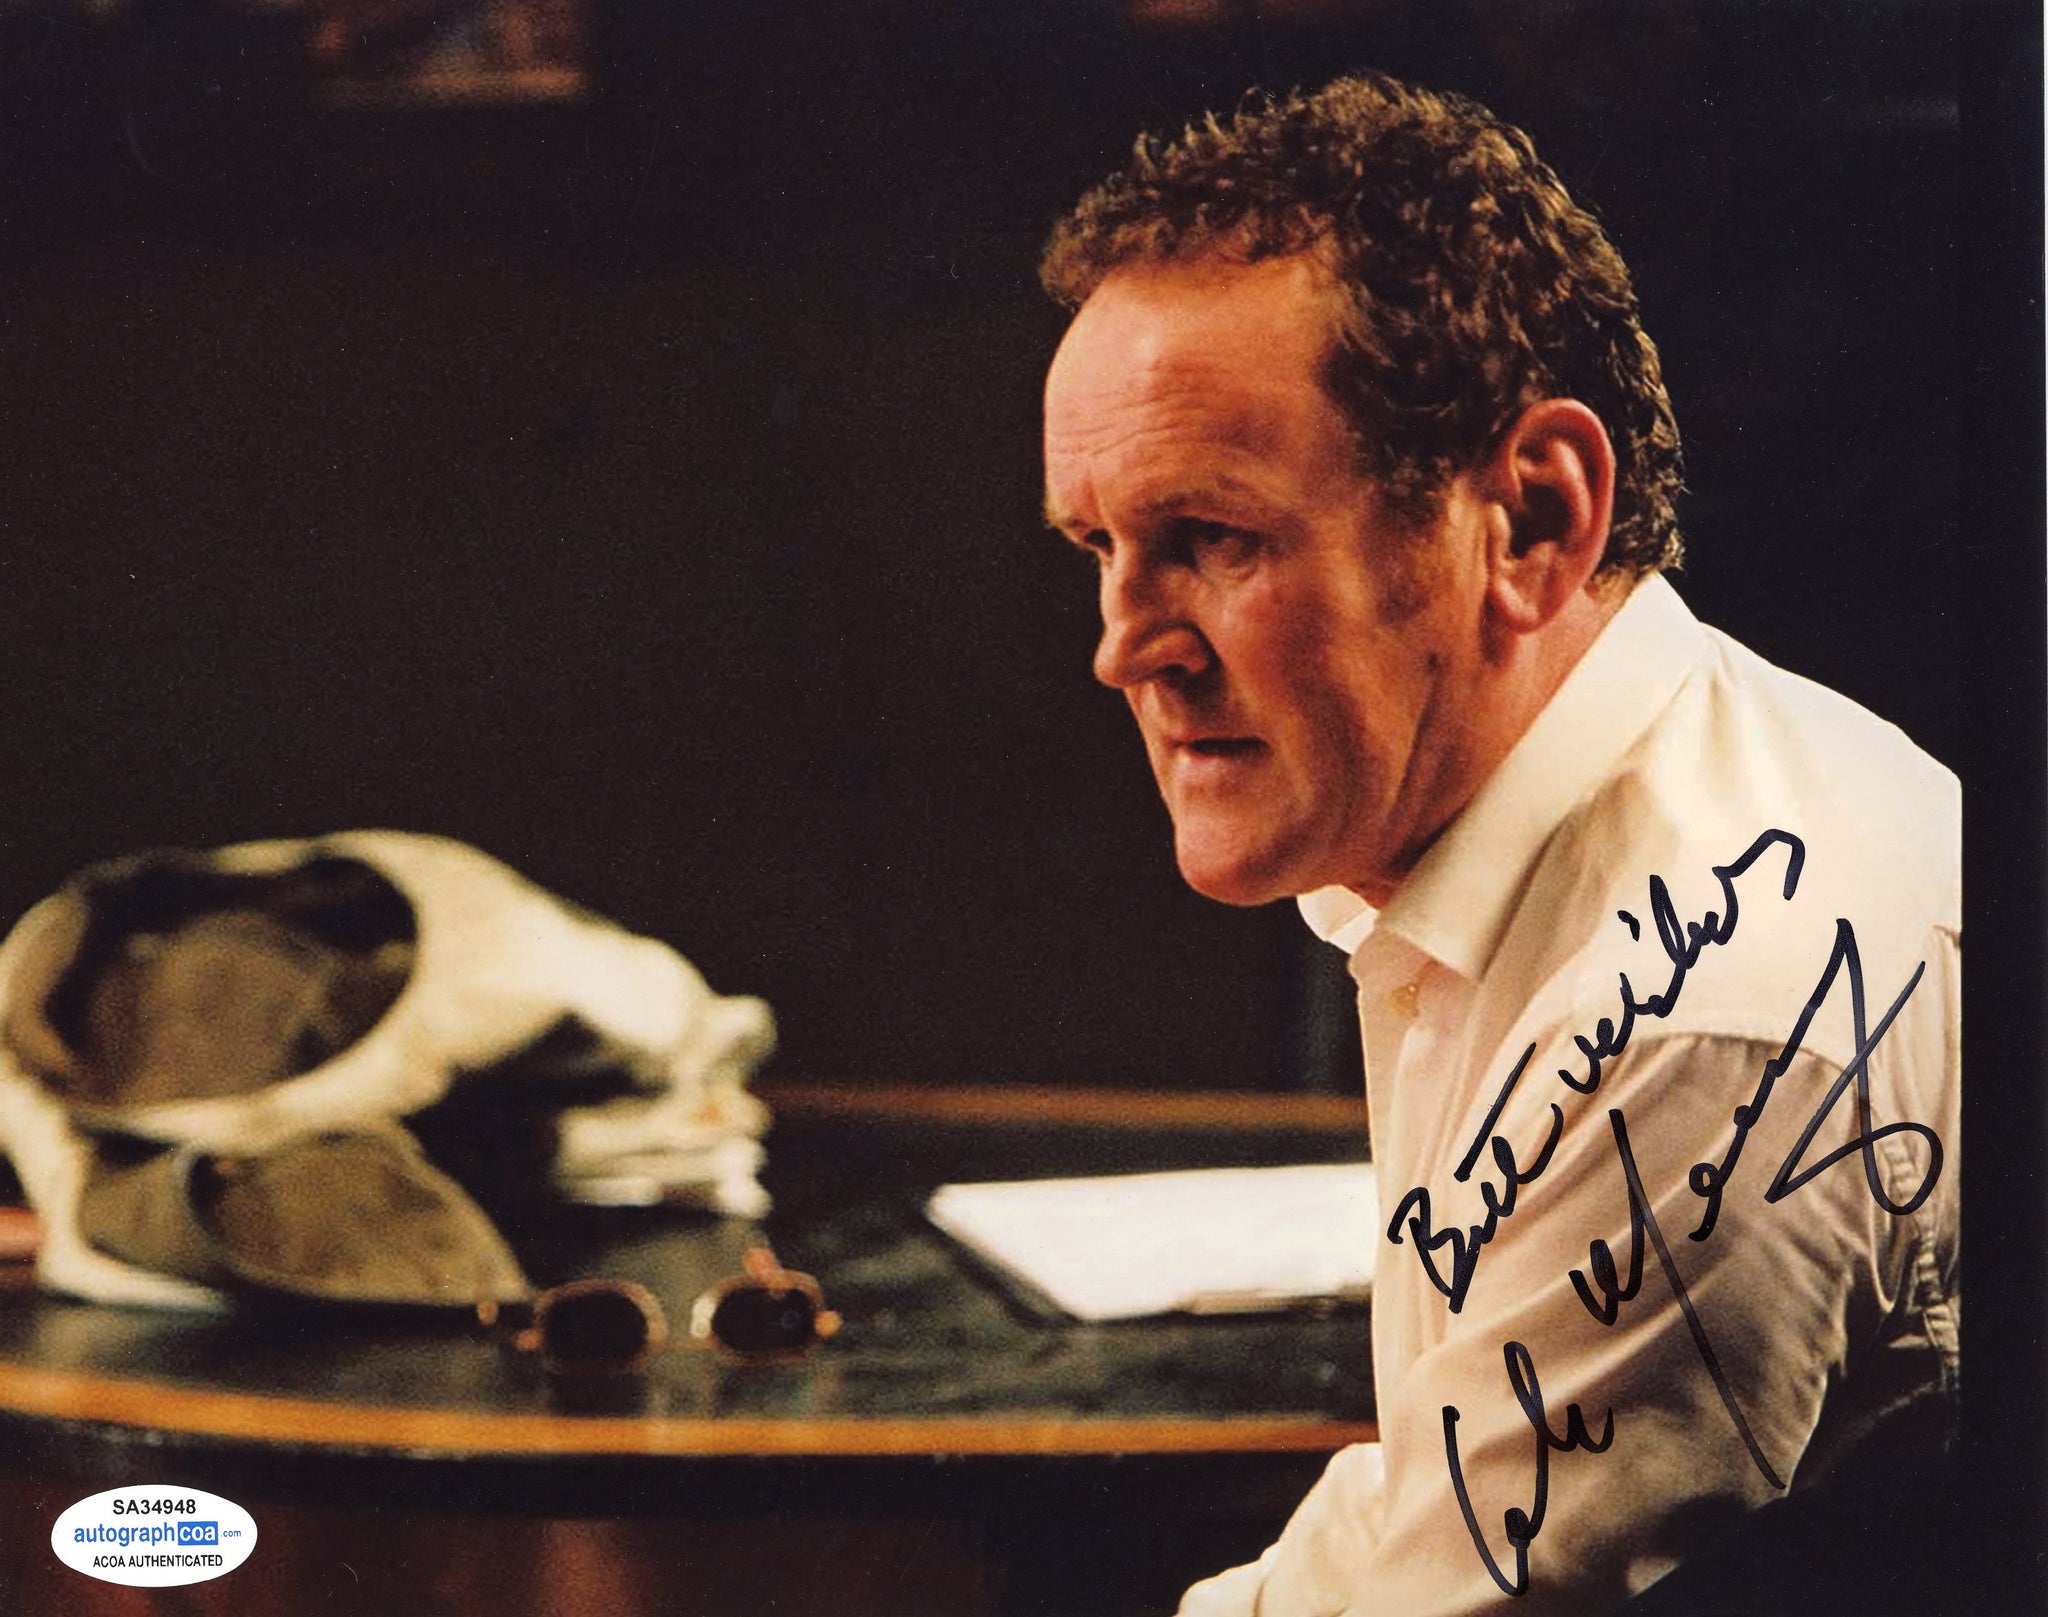 Colm Meaney Layer Cake Signed Autograph 8x10 Photo ACOA #2 - Outlaw Hobbies Authentic Autographs